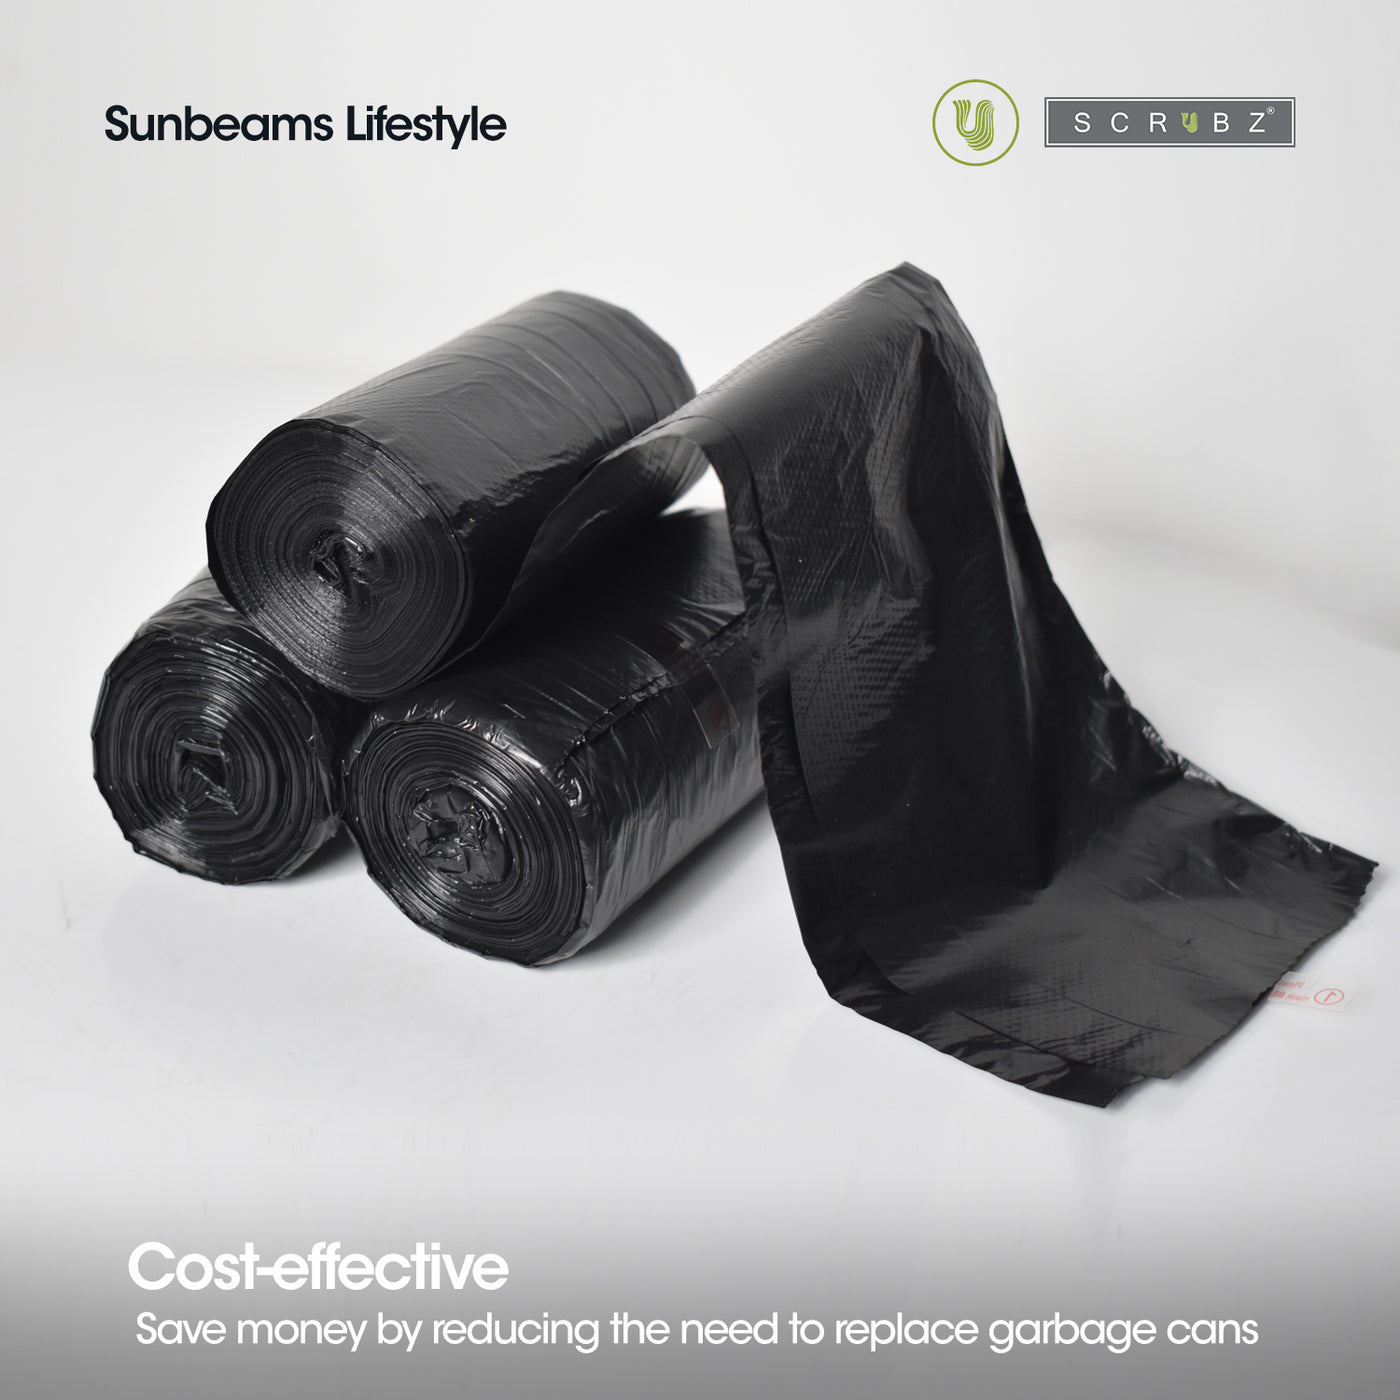 Scrubz Trash bag 30pcs Premium Polypropylene Made of high-quality materials that can be hold medium to heavy waste